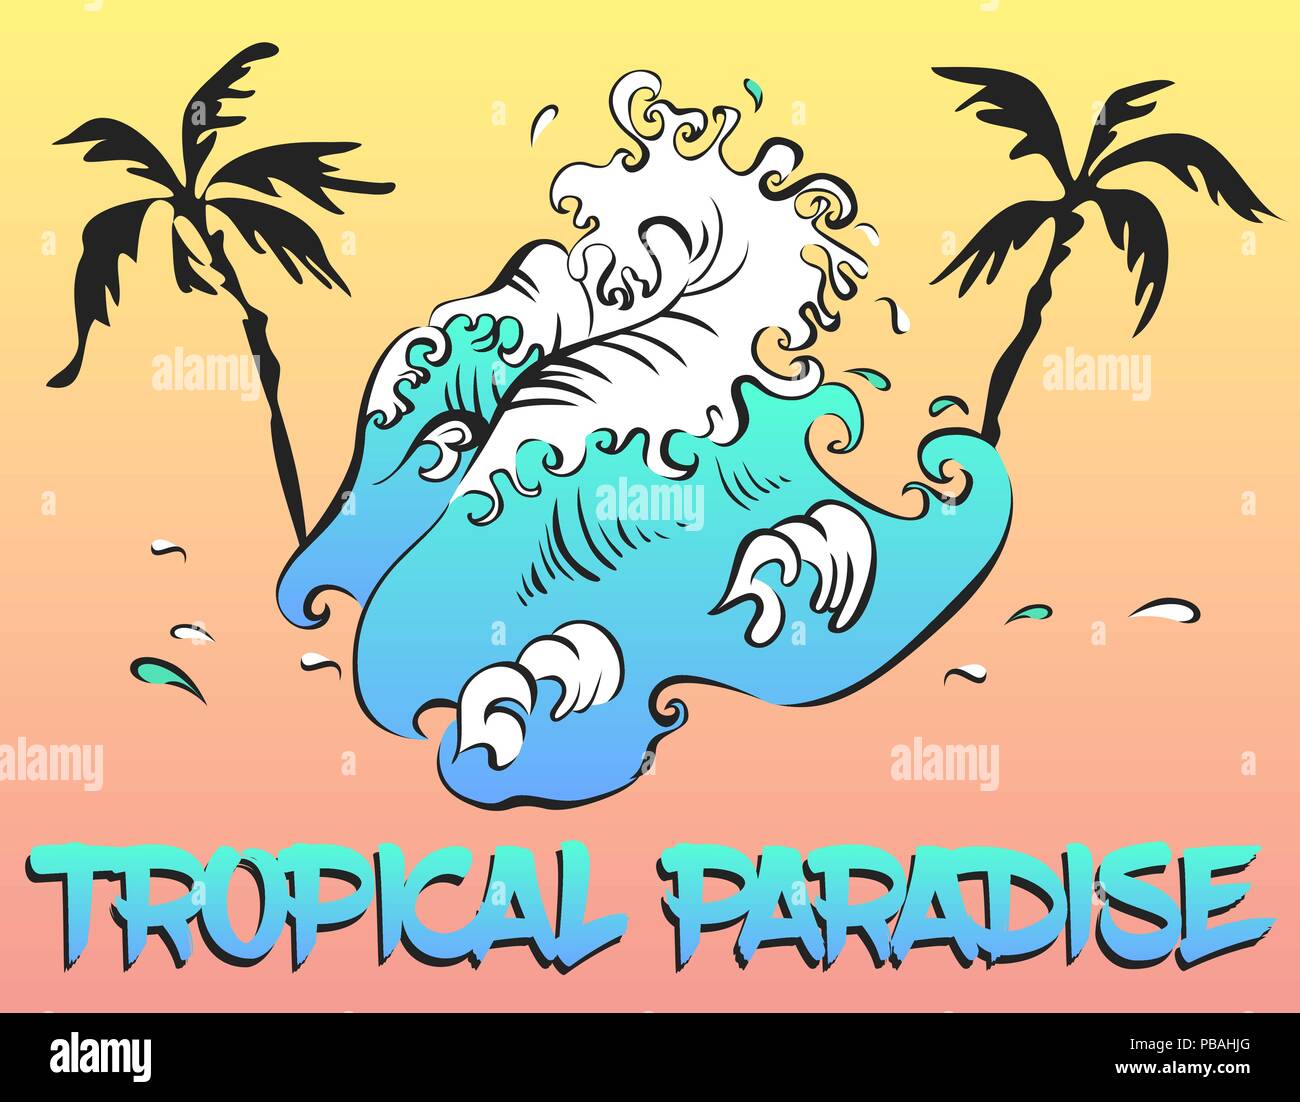 Tropical paradise poster. Wave, palms, sunset gradient and lettering. Tide in stylized ancient asian style. Palm trees silhouettes. Vector illustratio Stock Vector